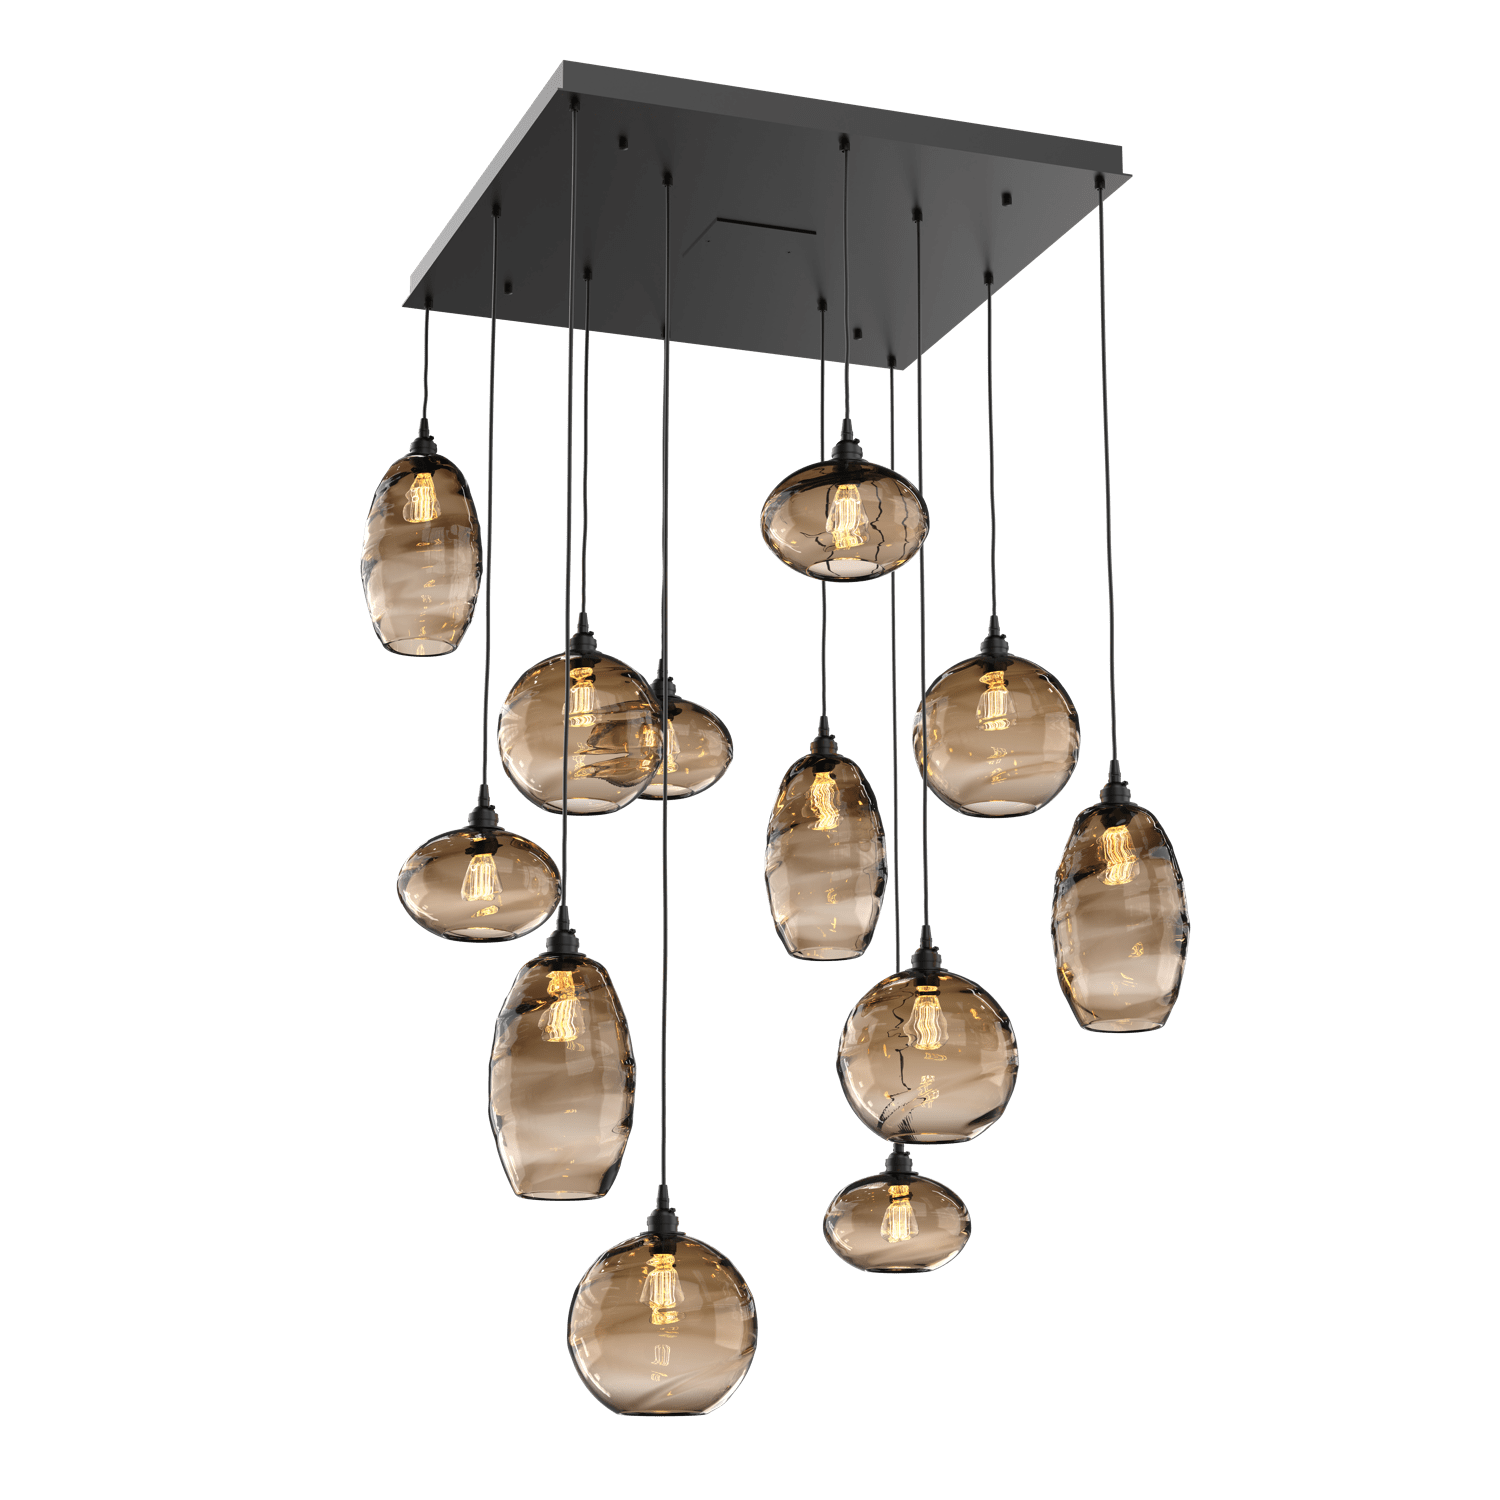 CHB0048-12-MB-OB-Hammerton-Studio-Optic-Blown-Glass-Misto-12-light-square-pendant-chandelier-with-matte-black-finish-and-optic-bronze-blown-glass-shades-and-incandescent-lamping